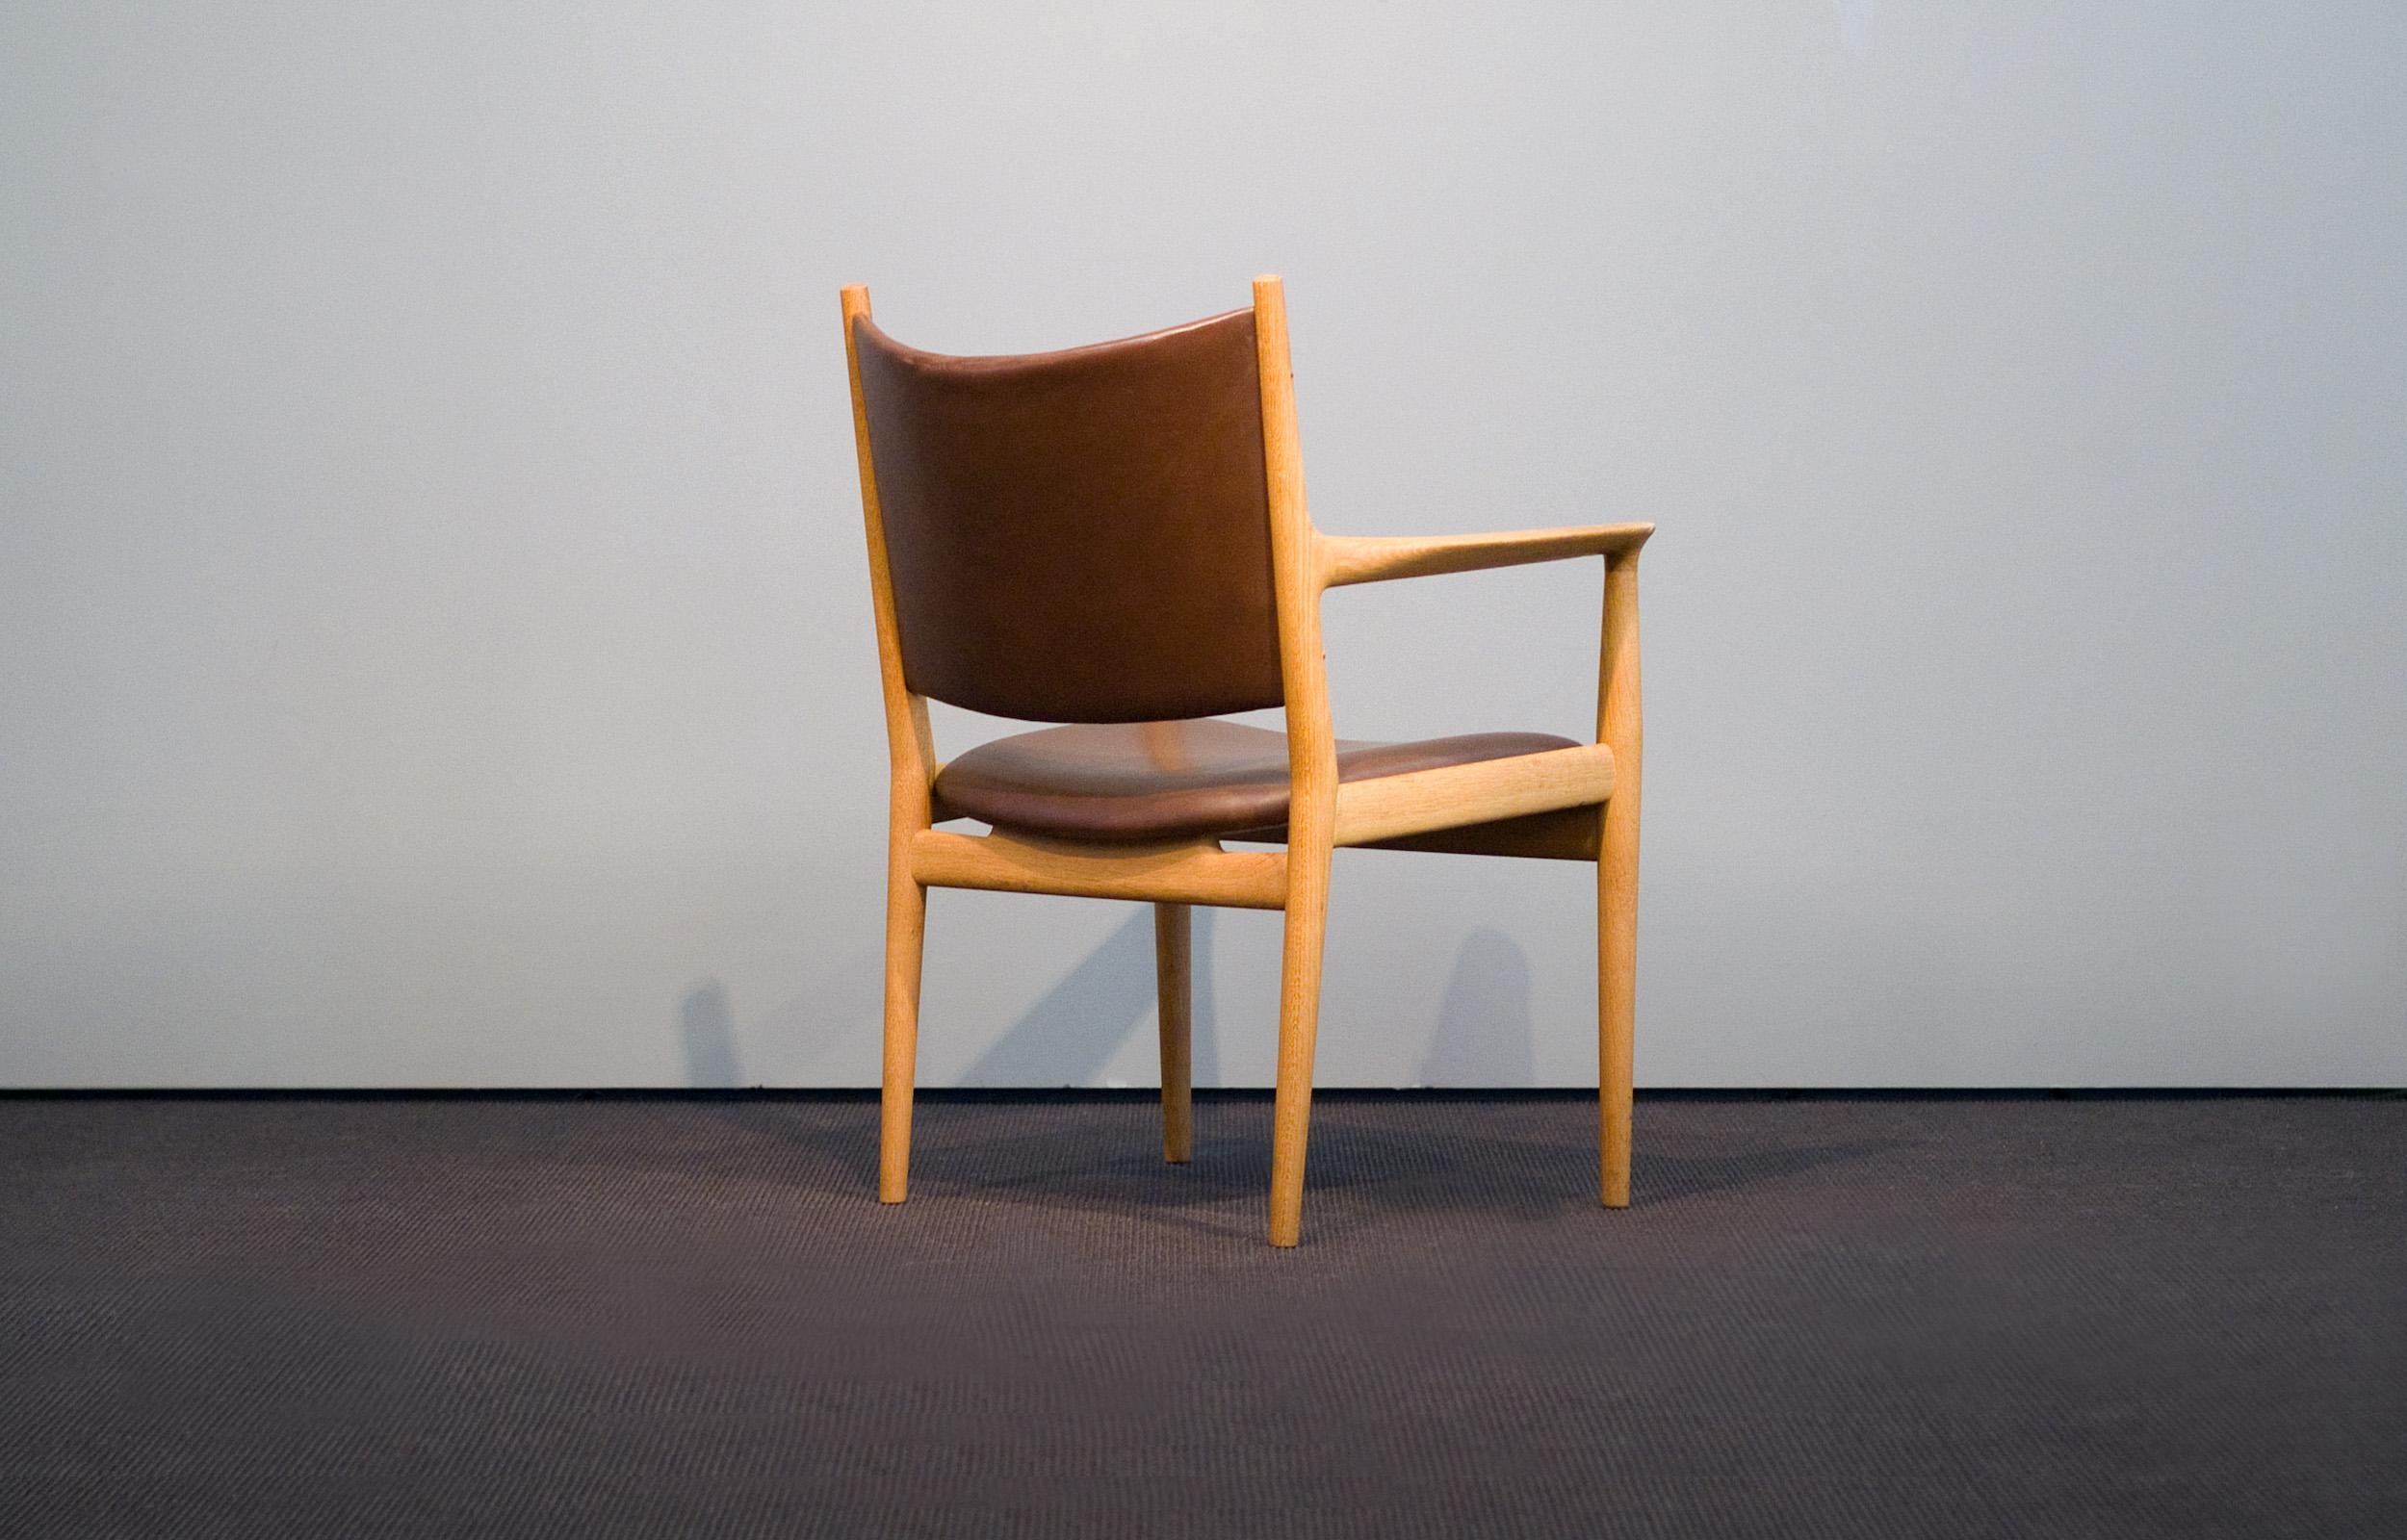 Wonderful Hans J. Wegner JH 513 chair made by Johannes Hansen, Denmark. Beautiful grained oak frame with original brown leather upholstery. Teak frame prof. restored.

Normal wear consistent with age and use.

  